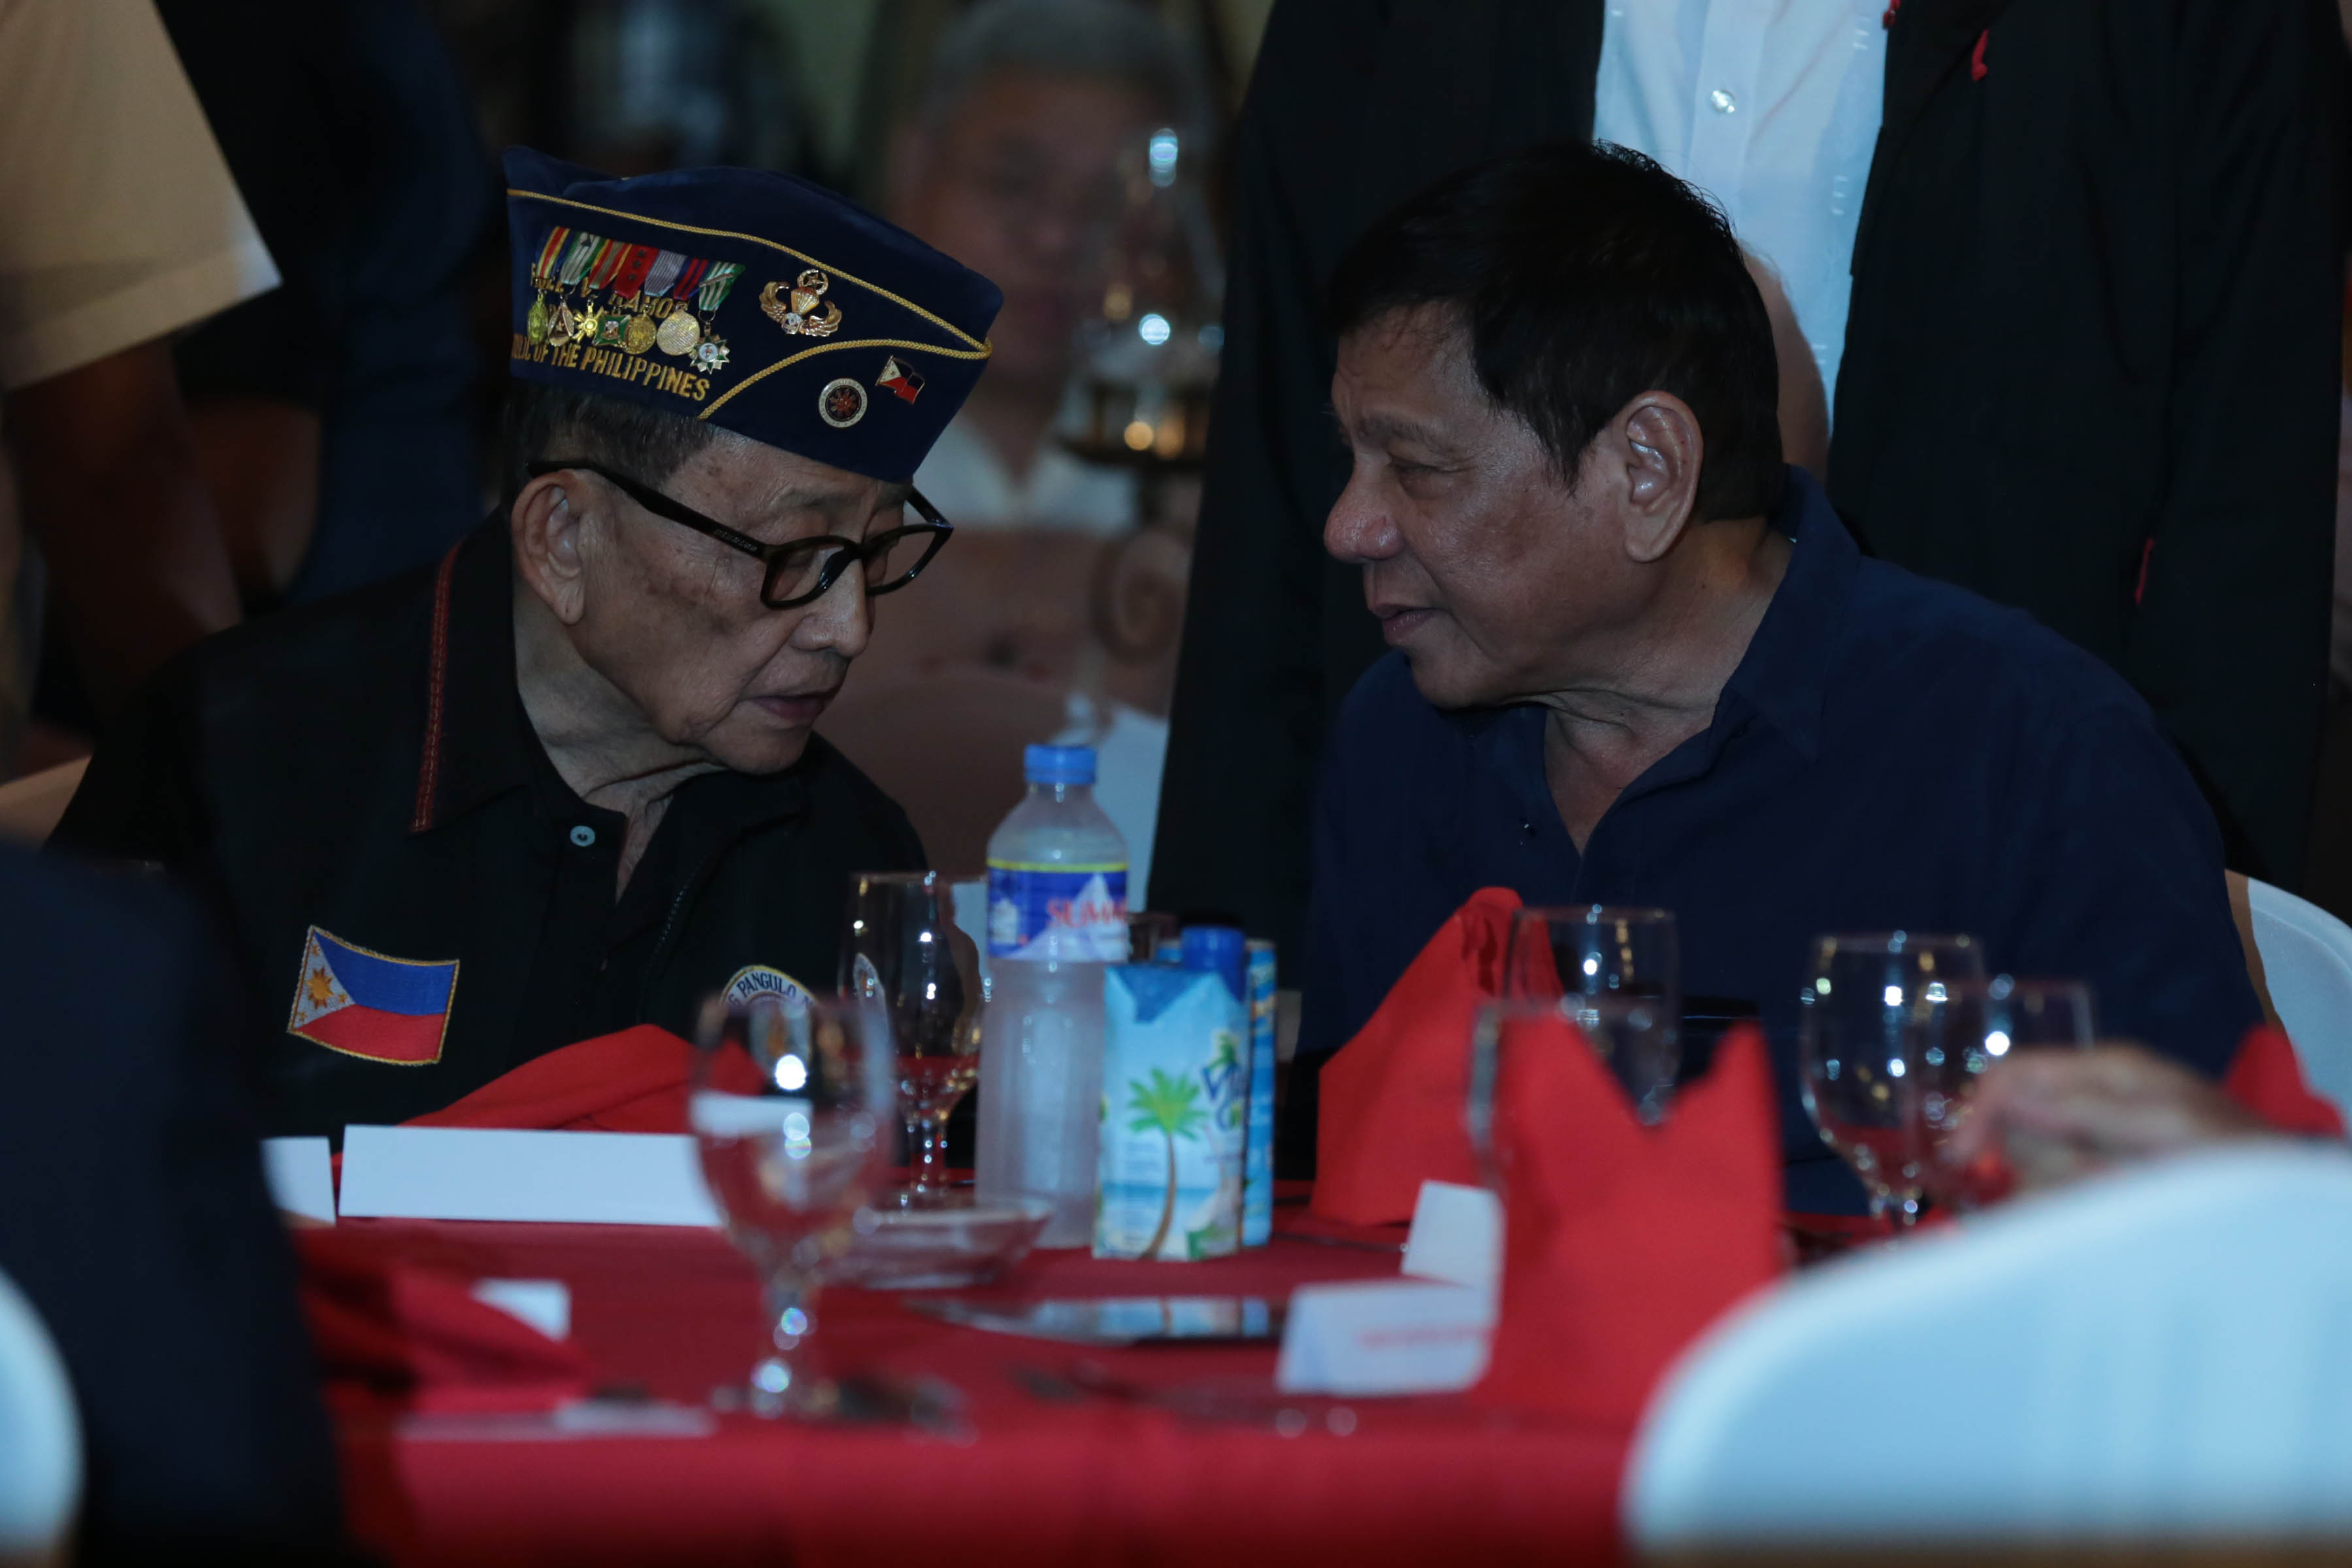 TWO LEADERS. President Rodrigo Duterte chats with former president Fidel V. Ramos during the Testimonial Dinner Reception organized by the San Beda Law Alumni Association on July 14, 2016. File photo by Toto Lozano/PPD 